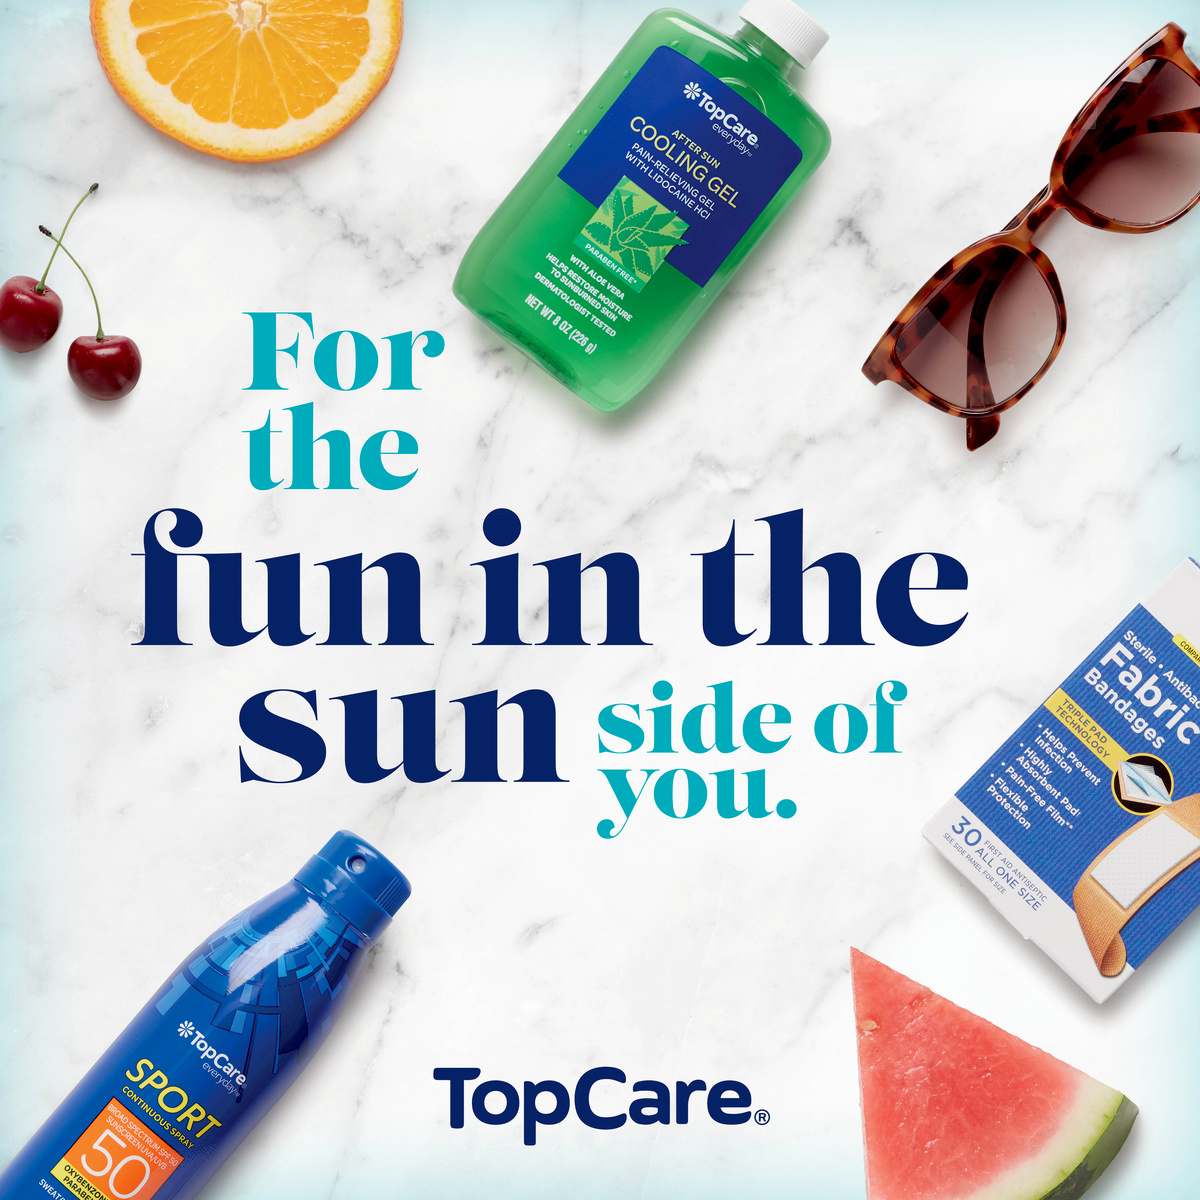 Are you ready for summer break? ☀️🌴 Make sure to pack everything you need for fun in the sun! #Summer #SunProtection